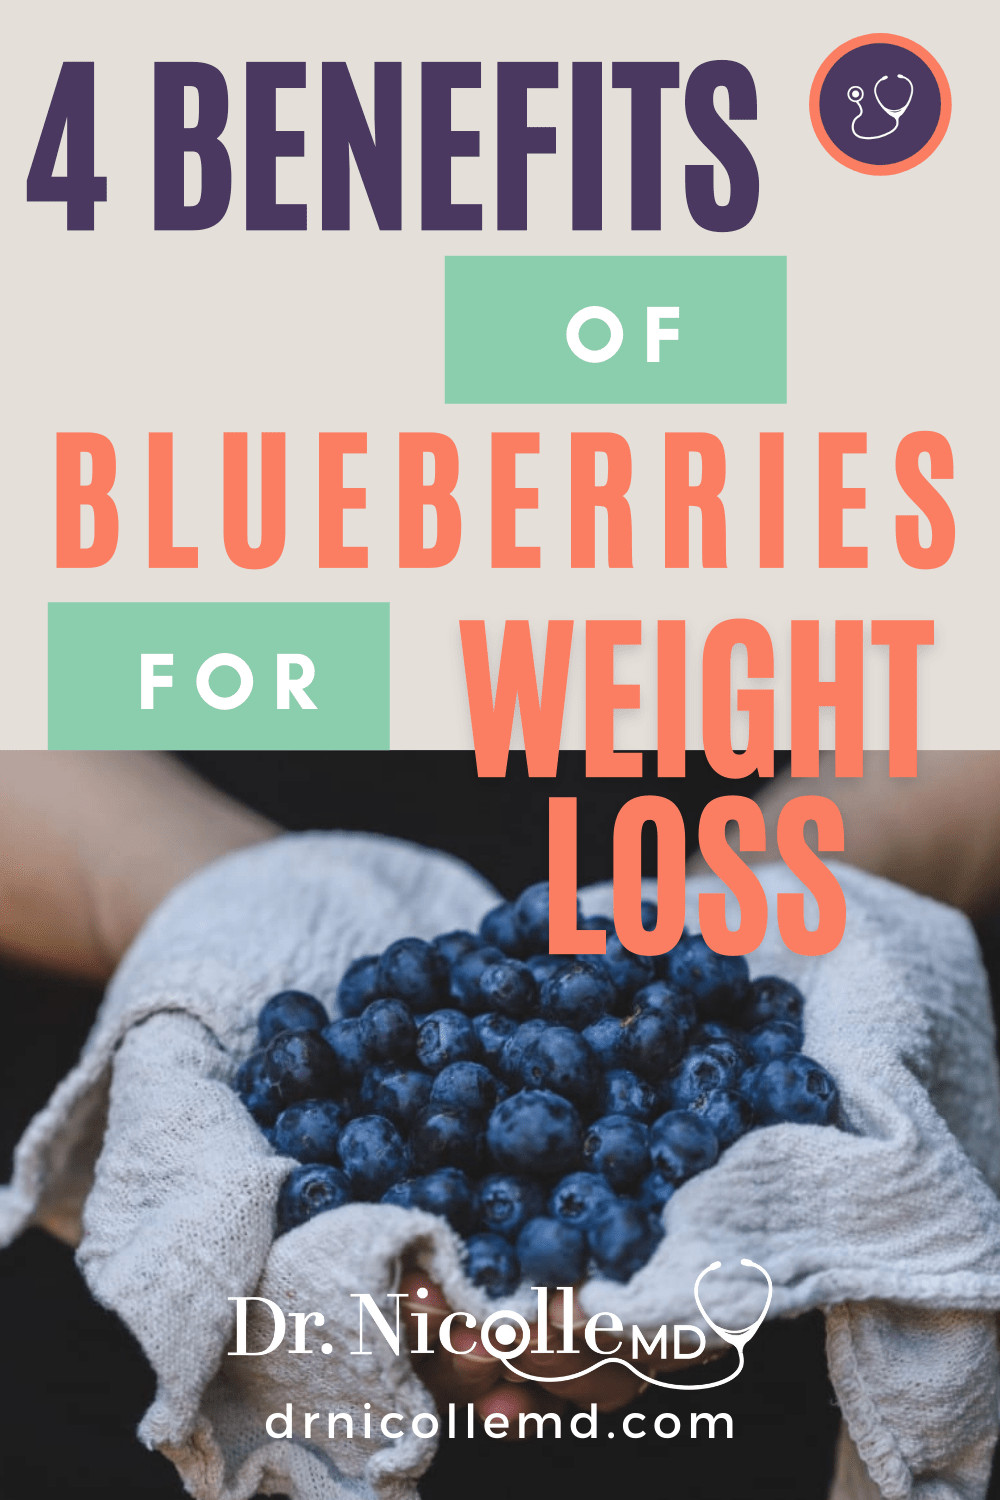 4 Benefits of Blueberries for Weight Loss